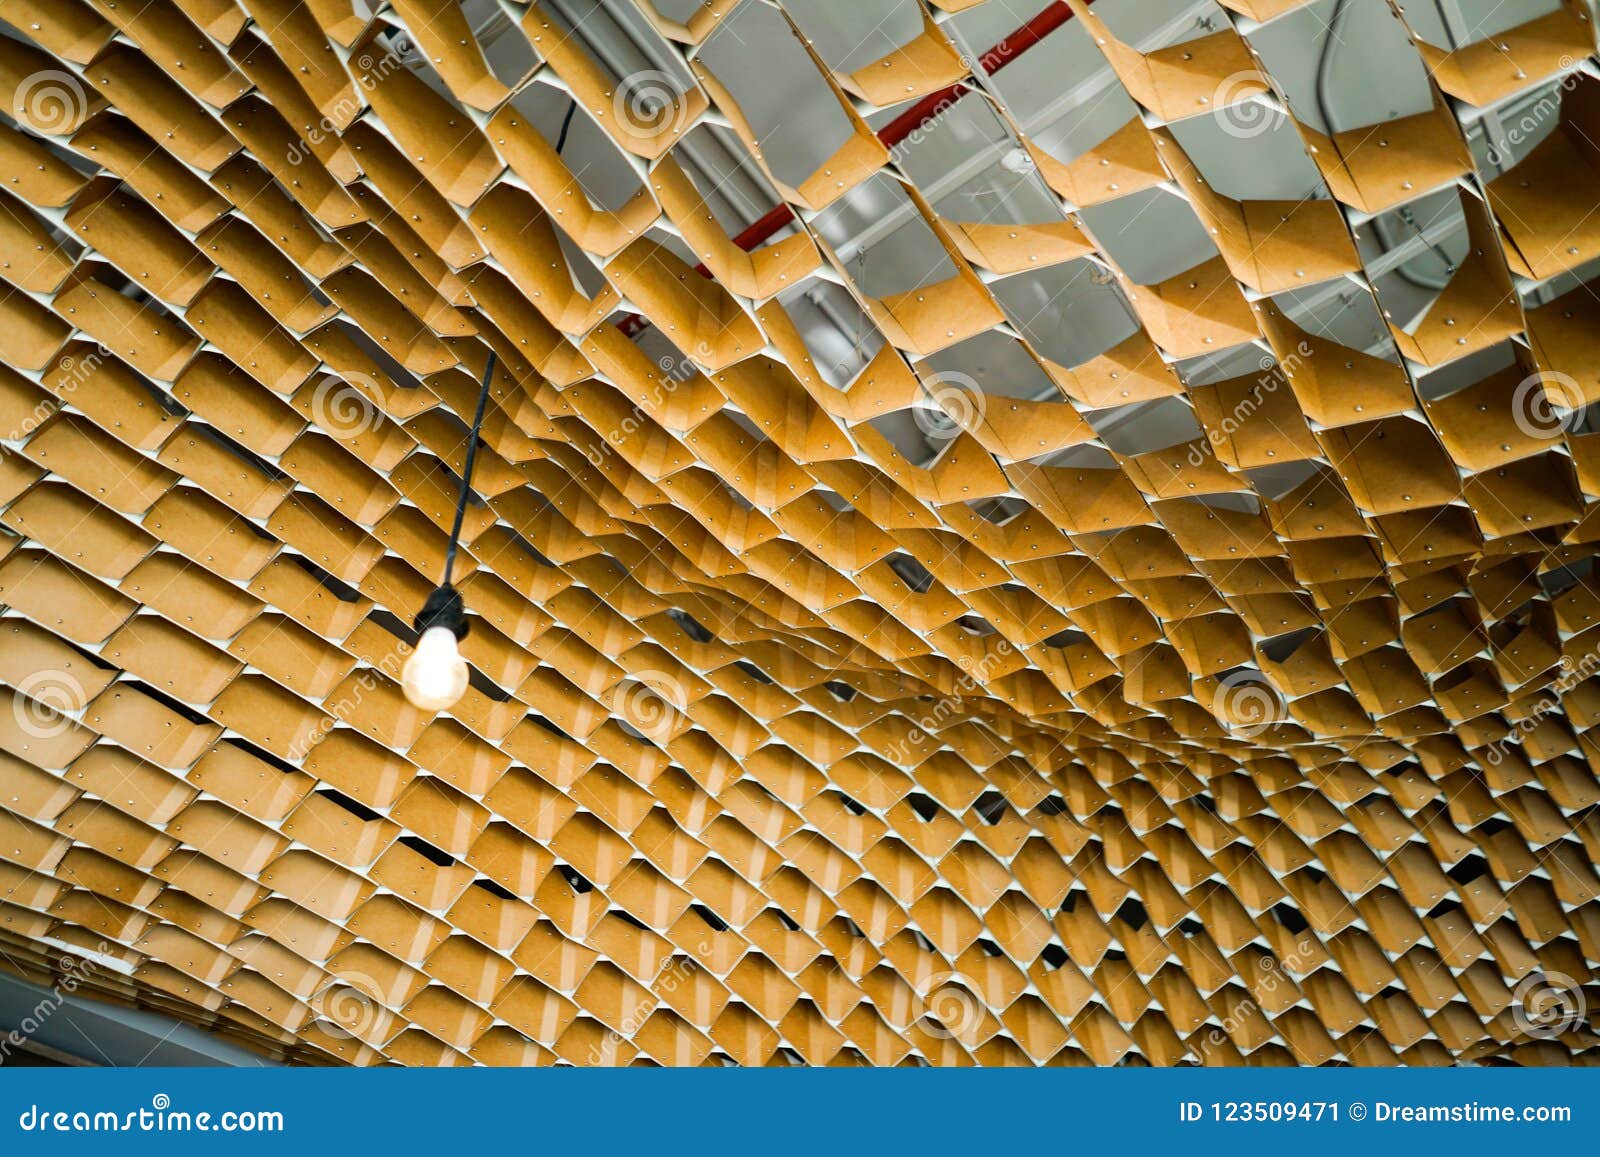 Ceiling Decoration With Paper Chain Stock Image Image Of